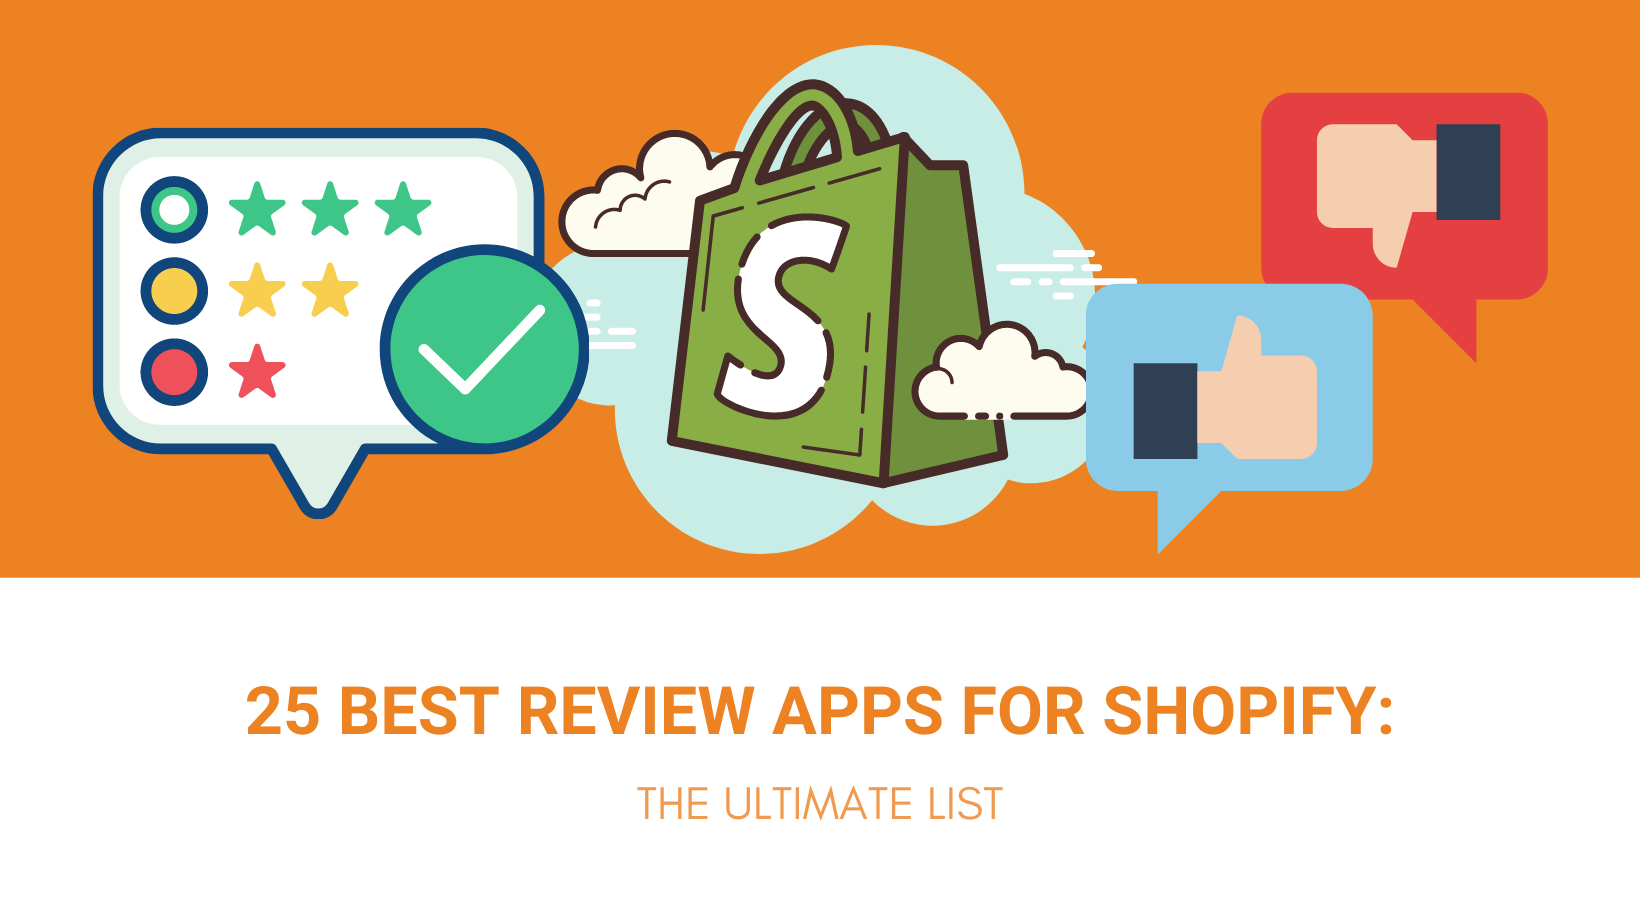 25 BEST REVIEW APPS FOR SHOPIFY THE ULTIMATE LIST